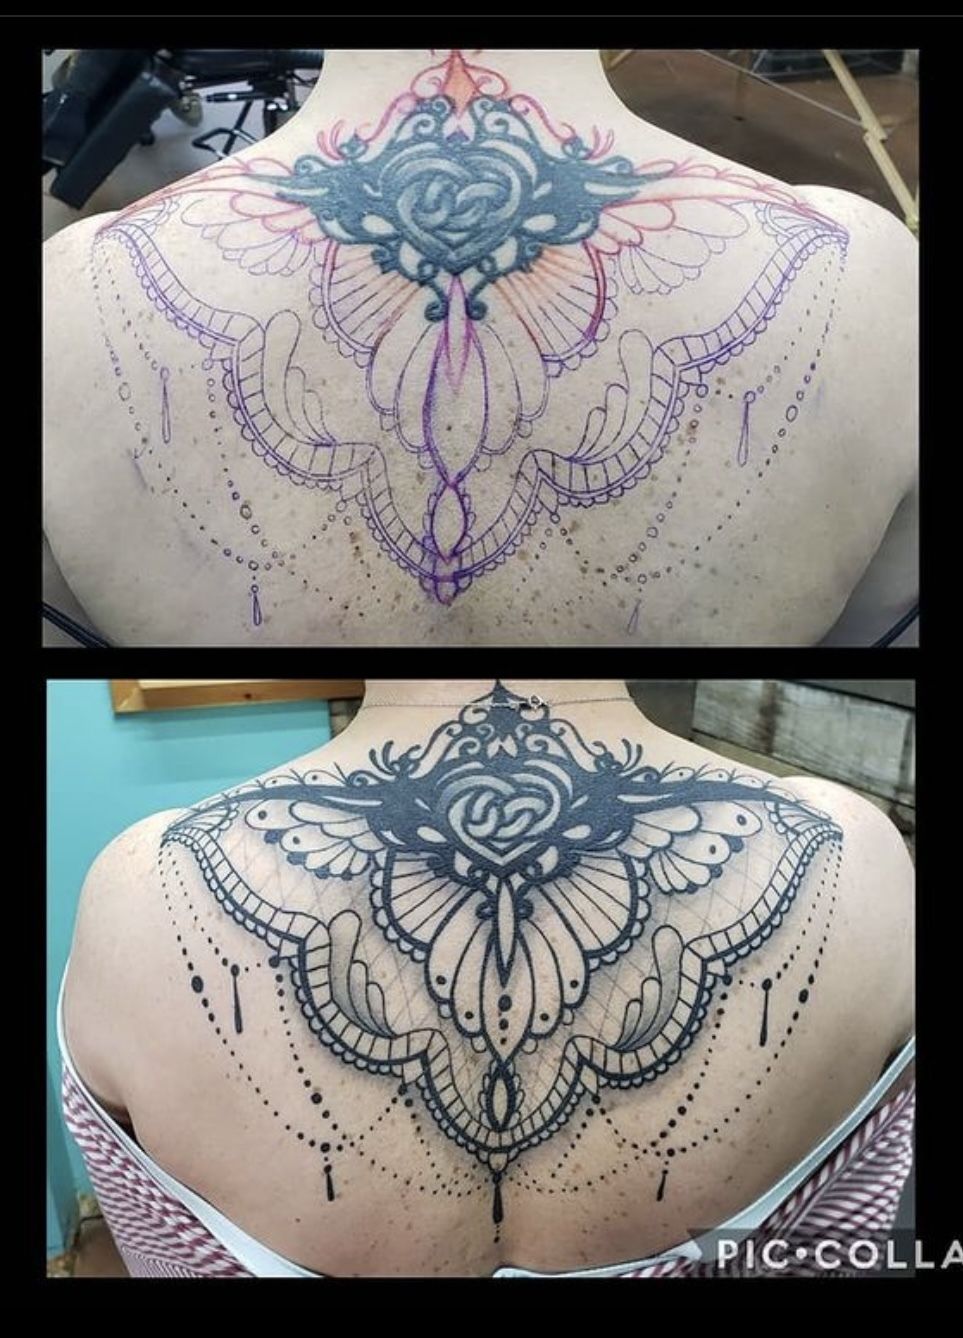 Tattoo Cover Ups: Tips and Advice From Artists | Female Tattooers